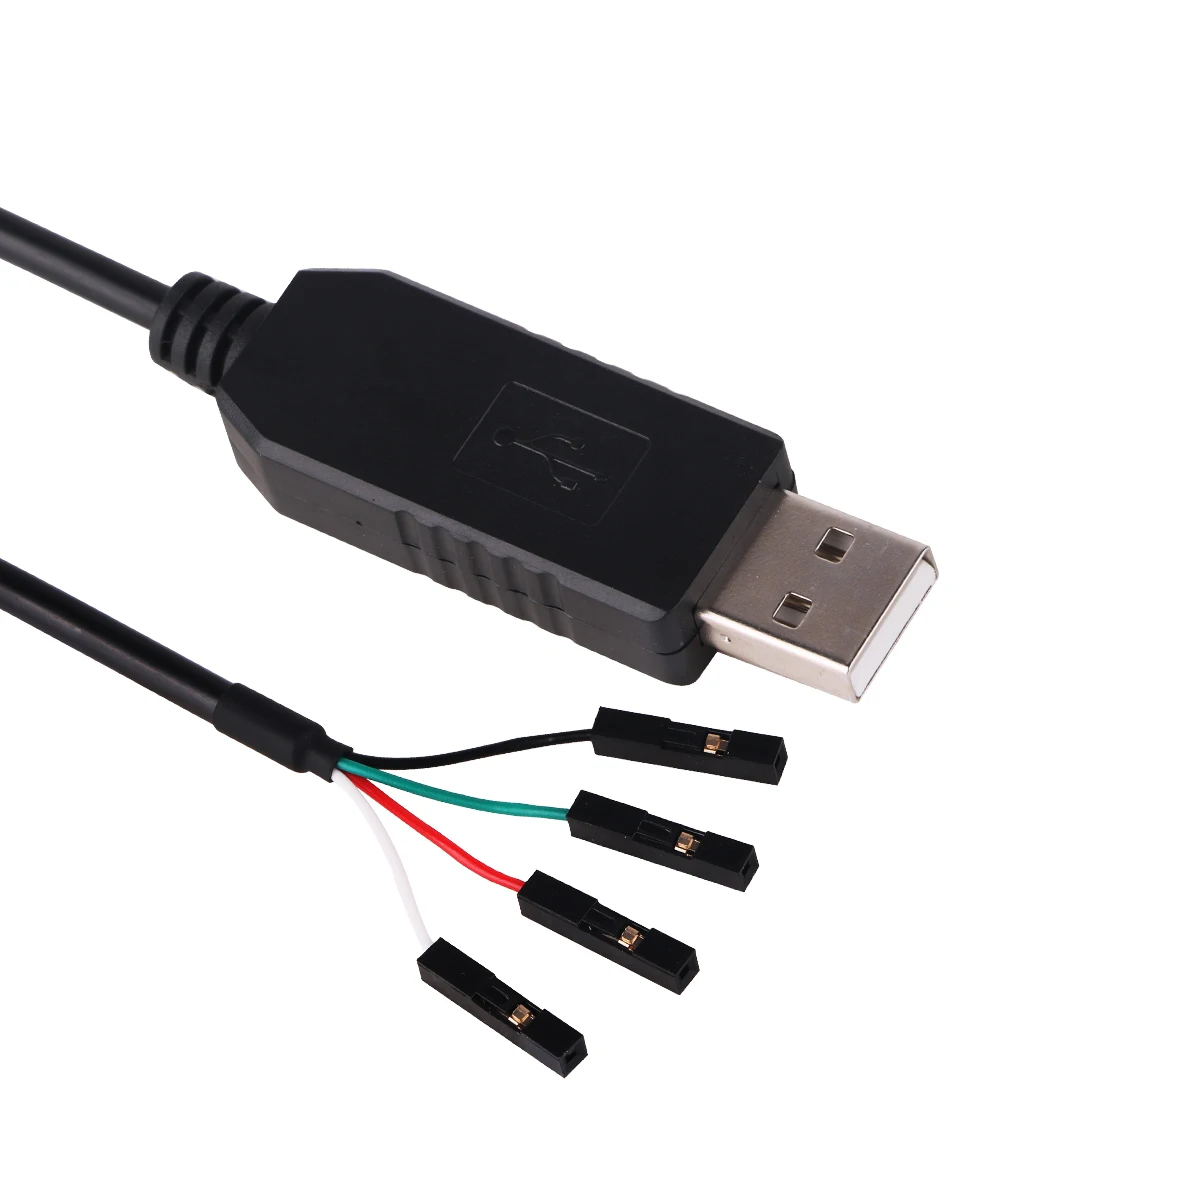 FTDI TTL-232R TTL TO USB 4-Way SIL,0.1” 2.54mm Pitch 4 Pin Terminal Block Adapter Connector Serial Converter Cable ftdi usb to rs485 serial adapter 4pin 2 54mm terminal block dupont connector converter cable compatible for usb rs485 2 54mm